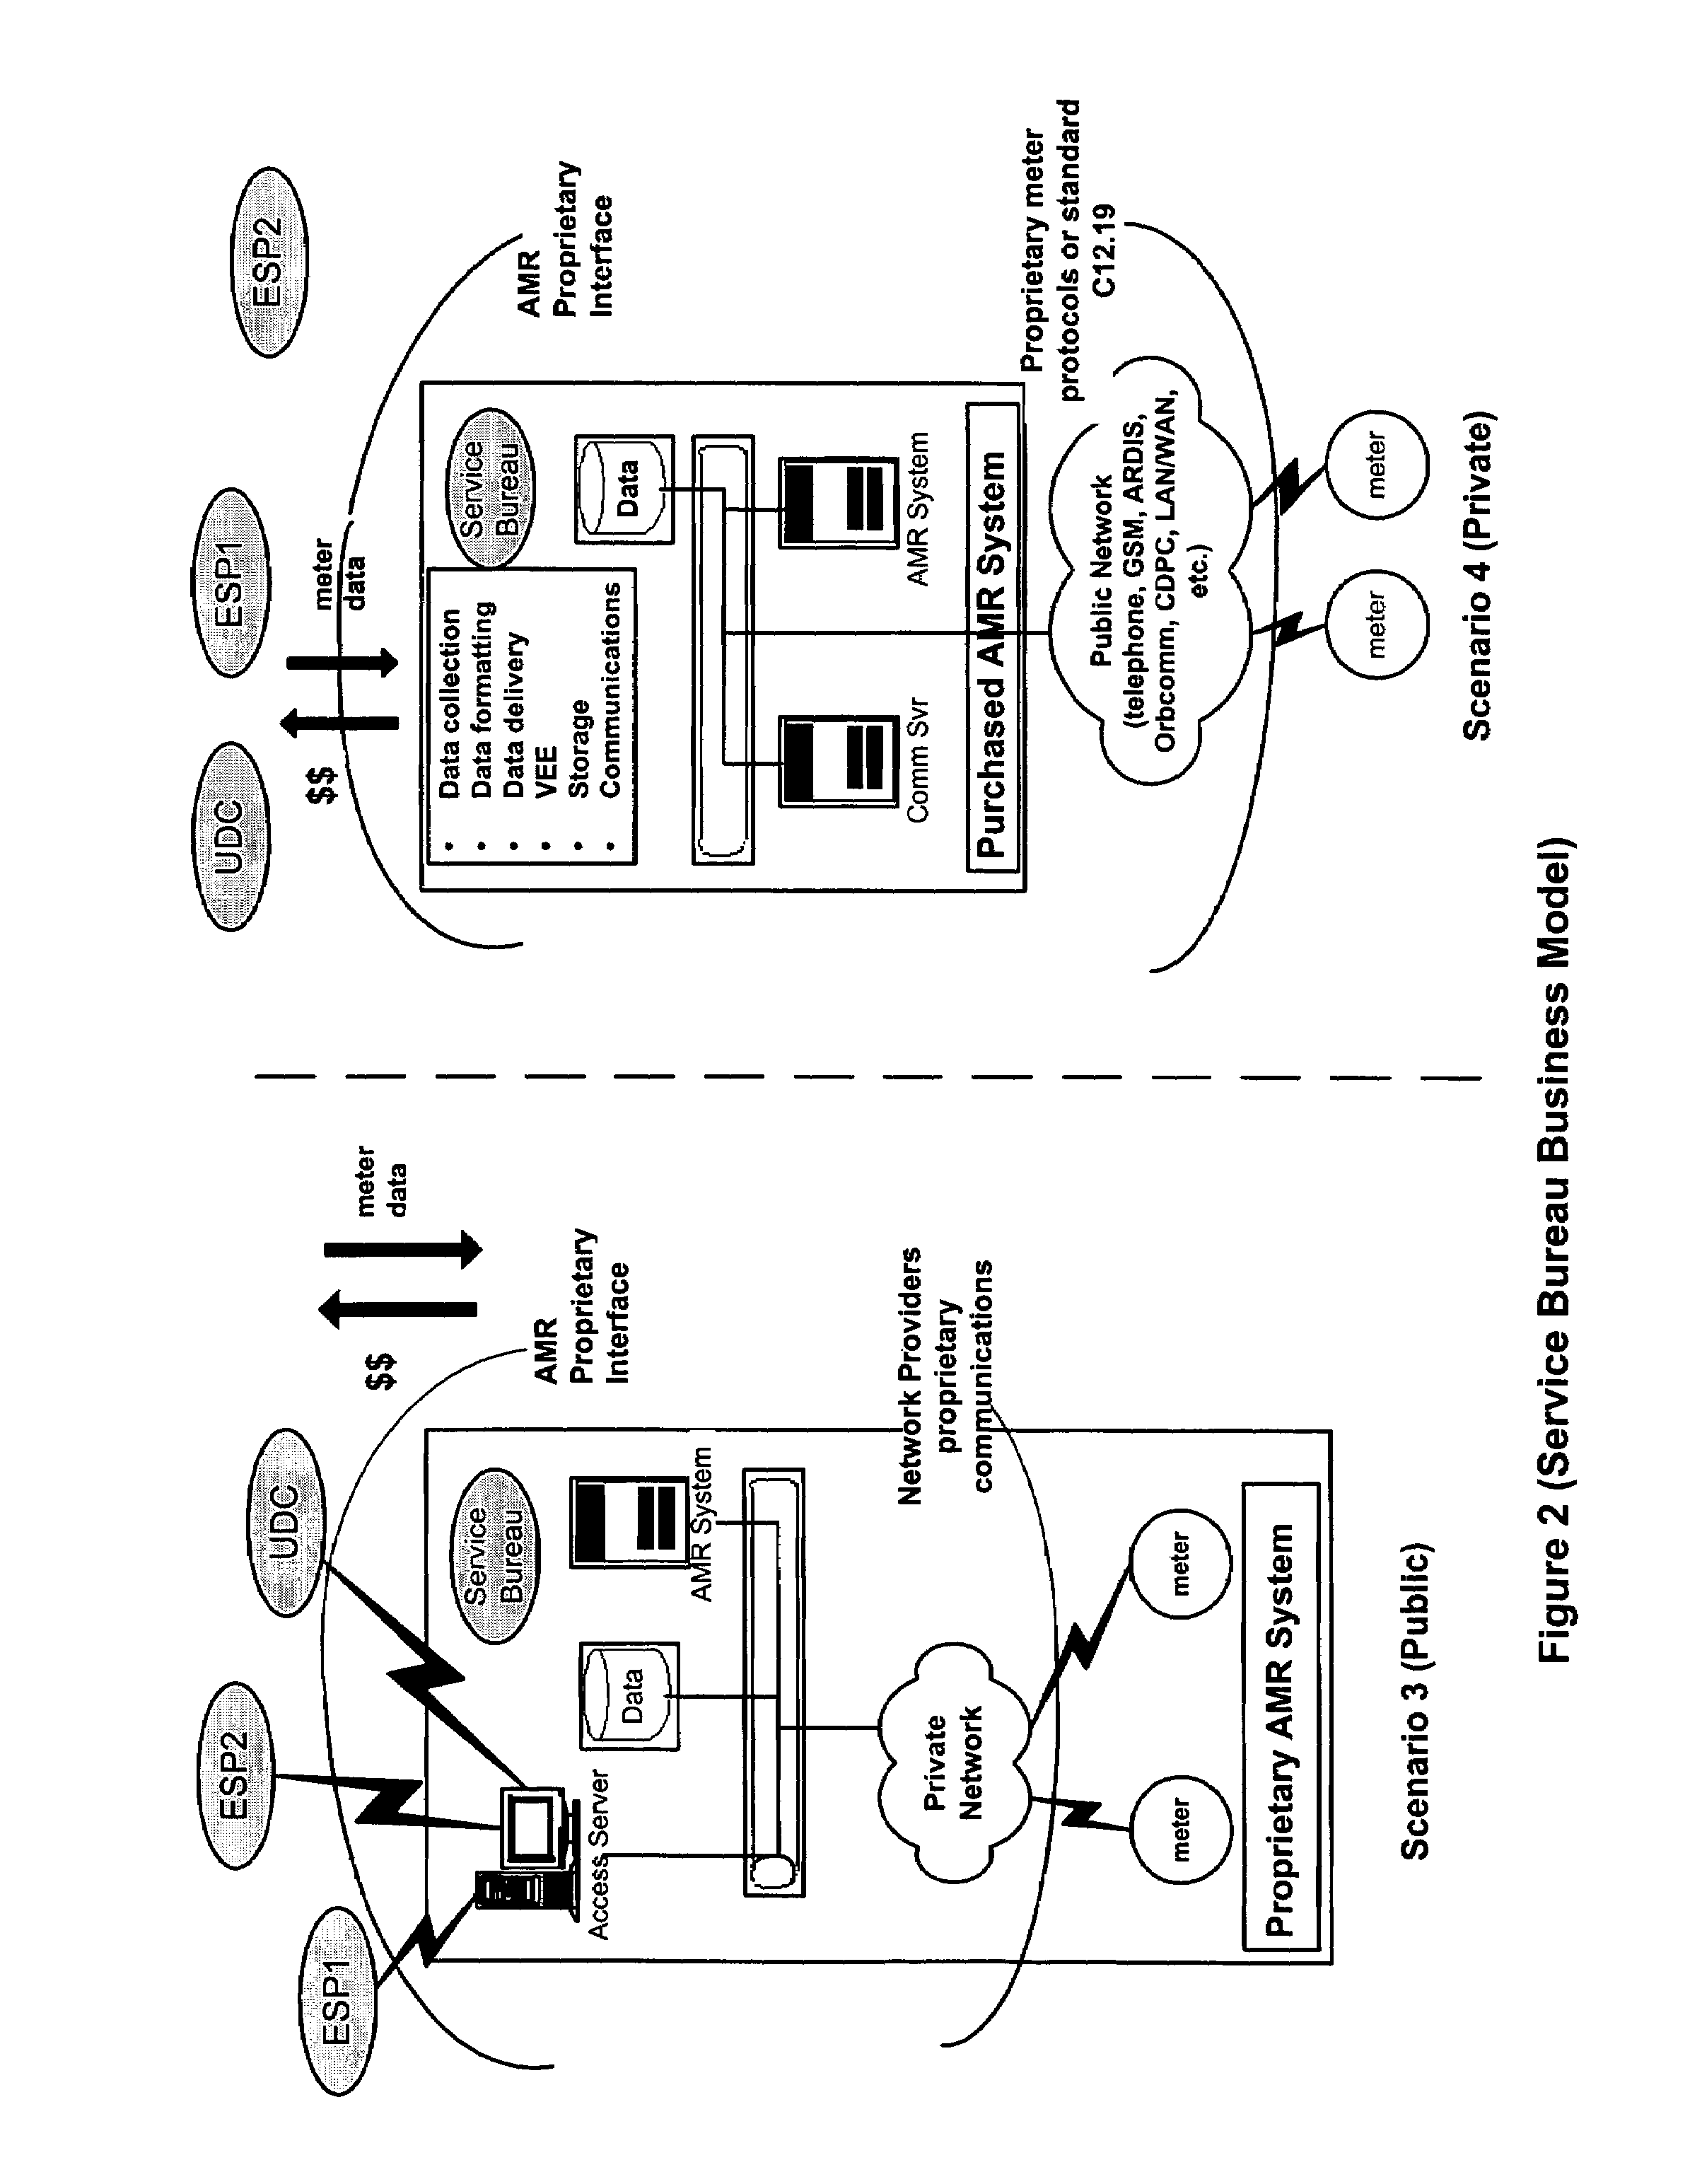 Network-enabled, extensible metering system